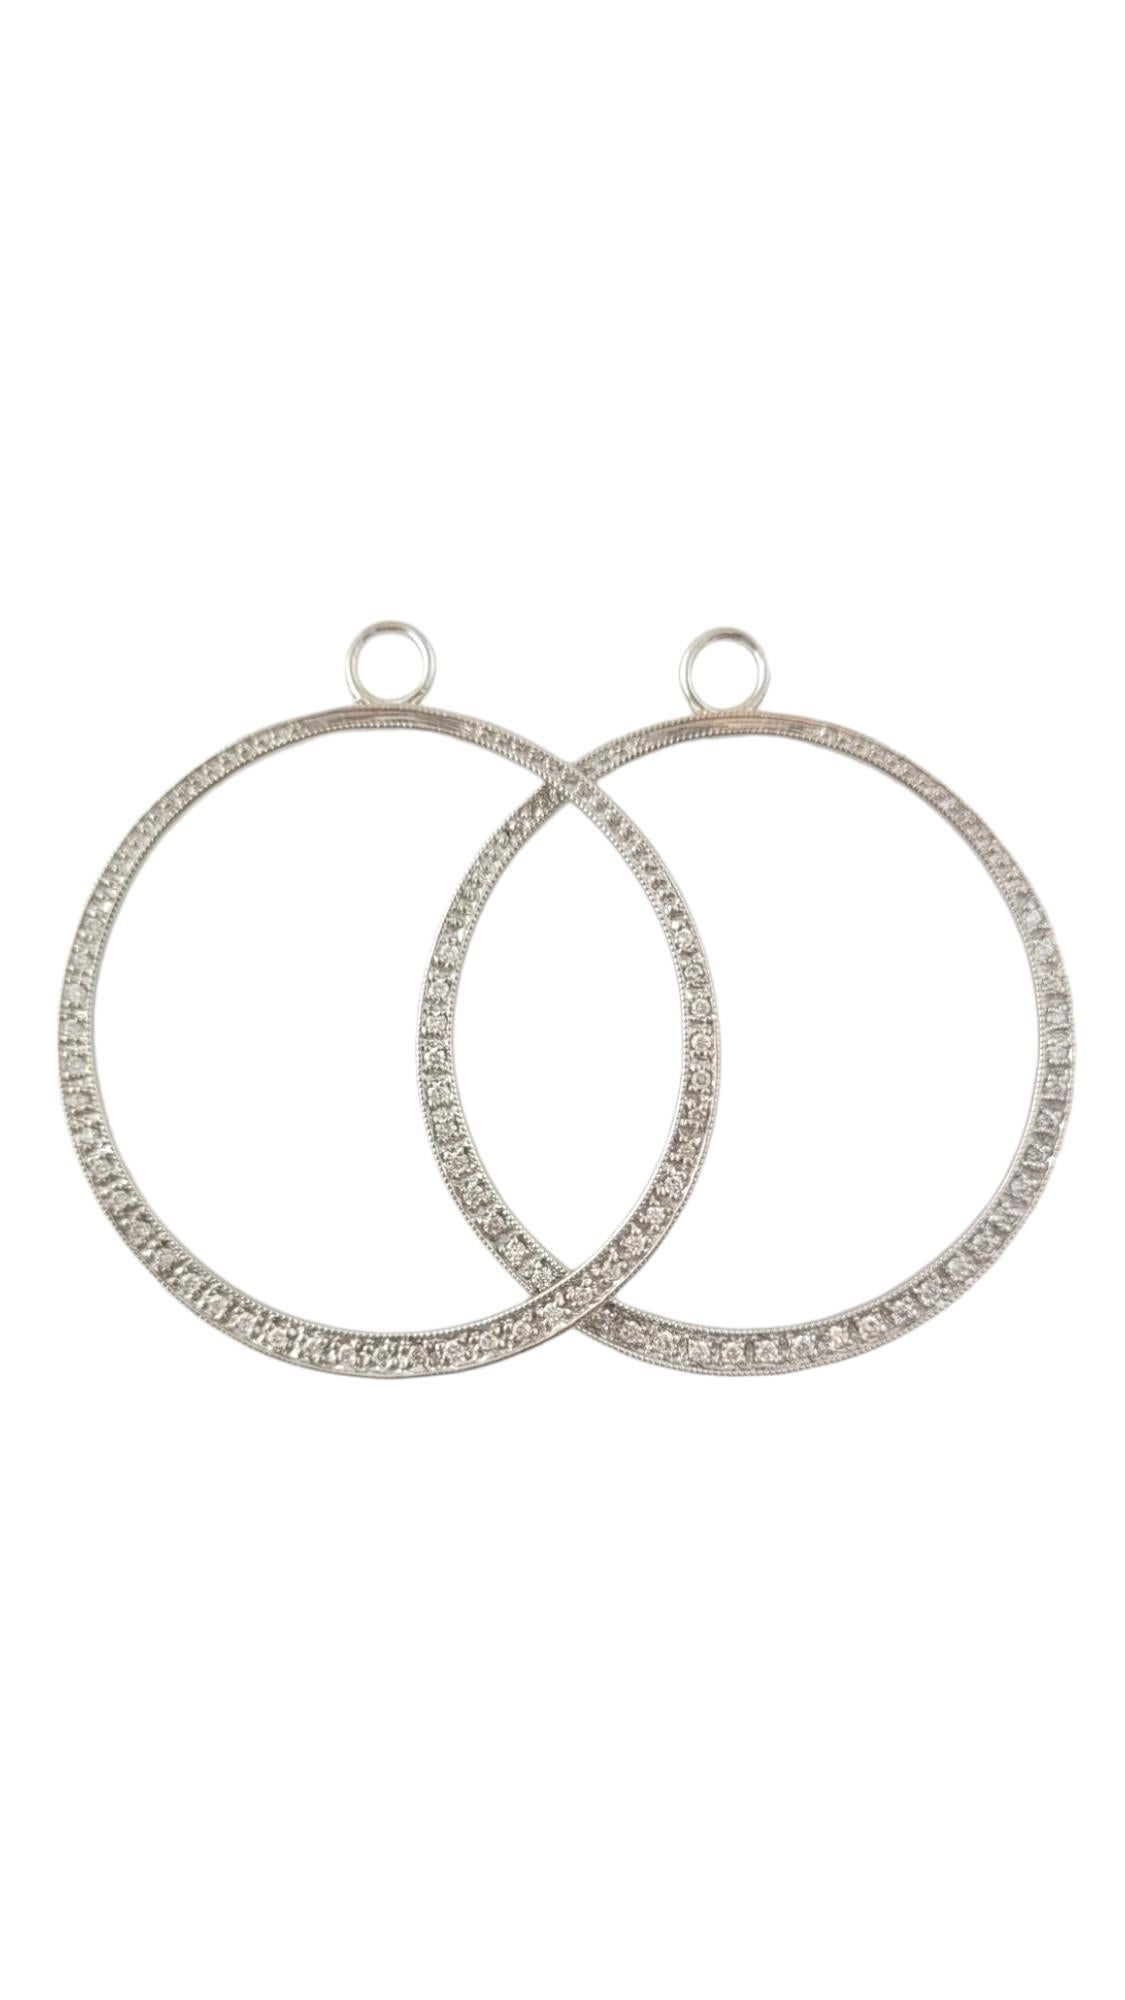 Vintage 14K White Gold Hoop Enhancers / Charms for Stud Earrings -

These classic hoop accessories with 70 sparkling round brilliant diamonds frame the face with elegance when paired with some beautiful studs!

Approximate total diamond weight: .50